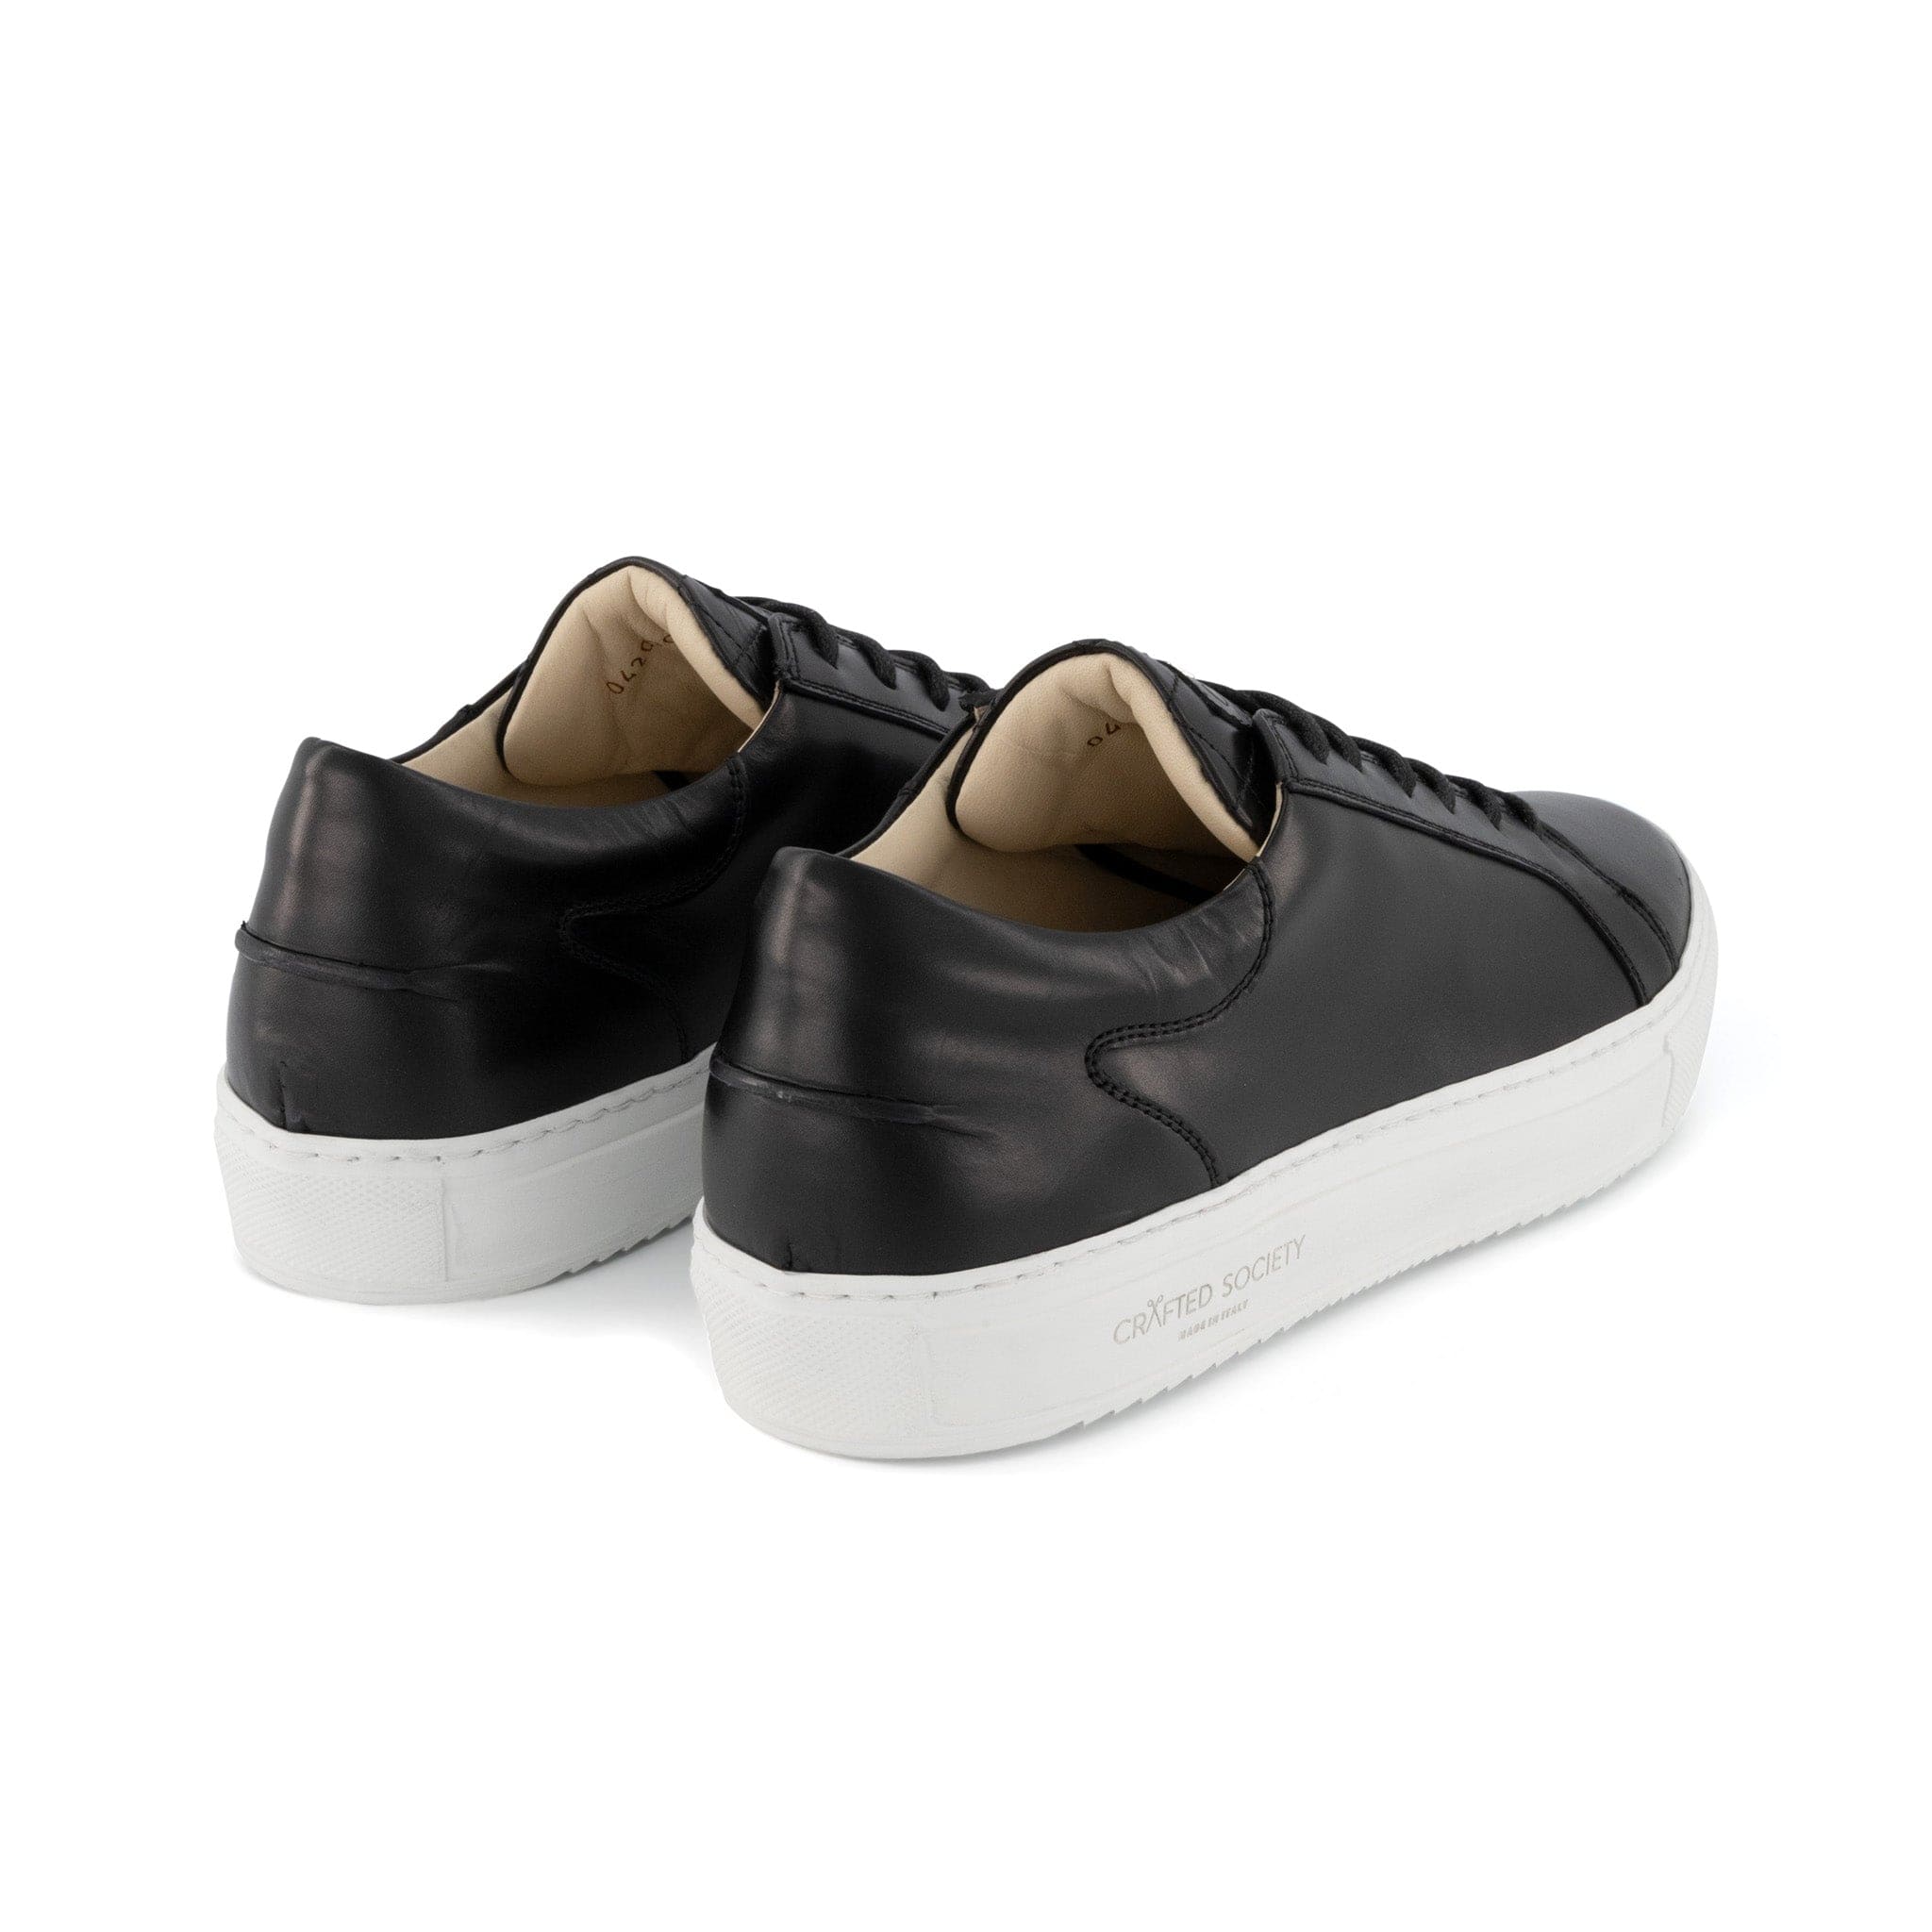 Mario Low Refined Sneaker | Black Full Grain Leather | White Outsole | Made in Italy